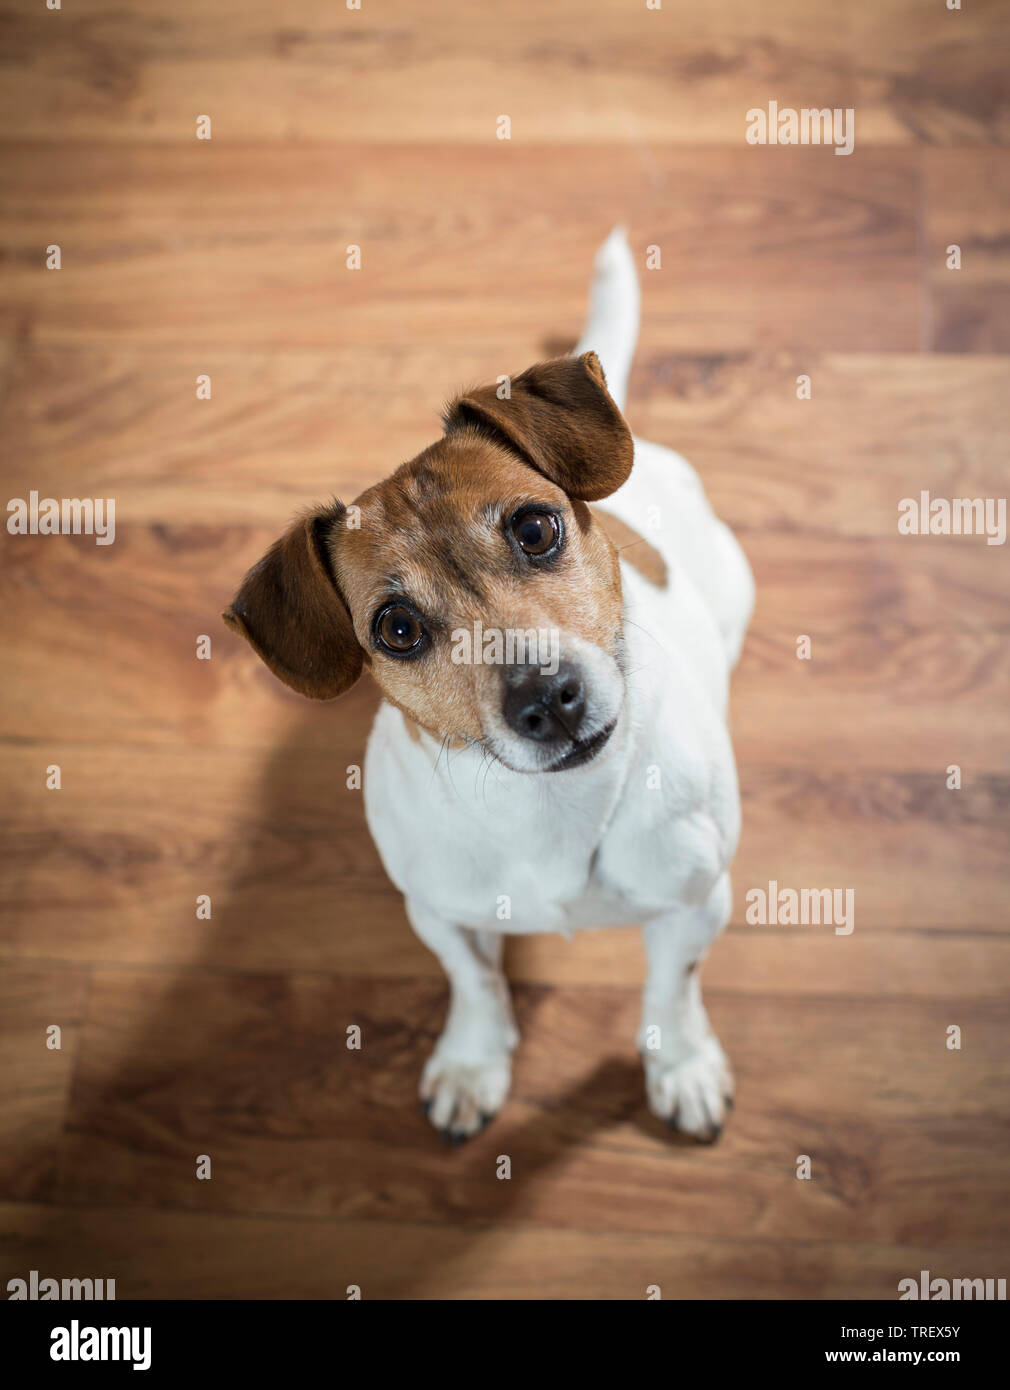 Jack Russell Terrier sitting on parquet floor, looking up. Germany. Stock Photo